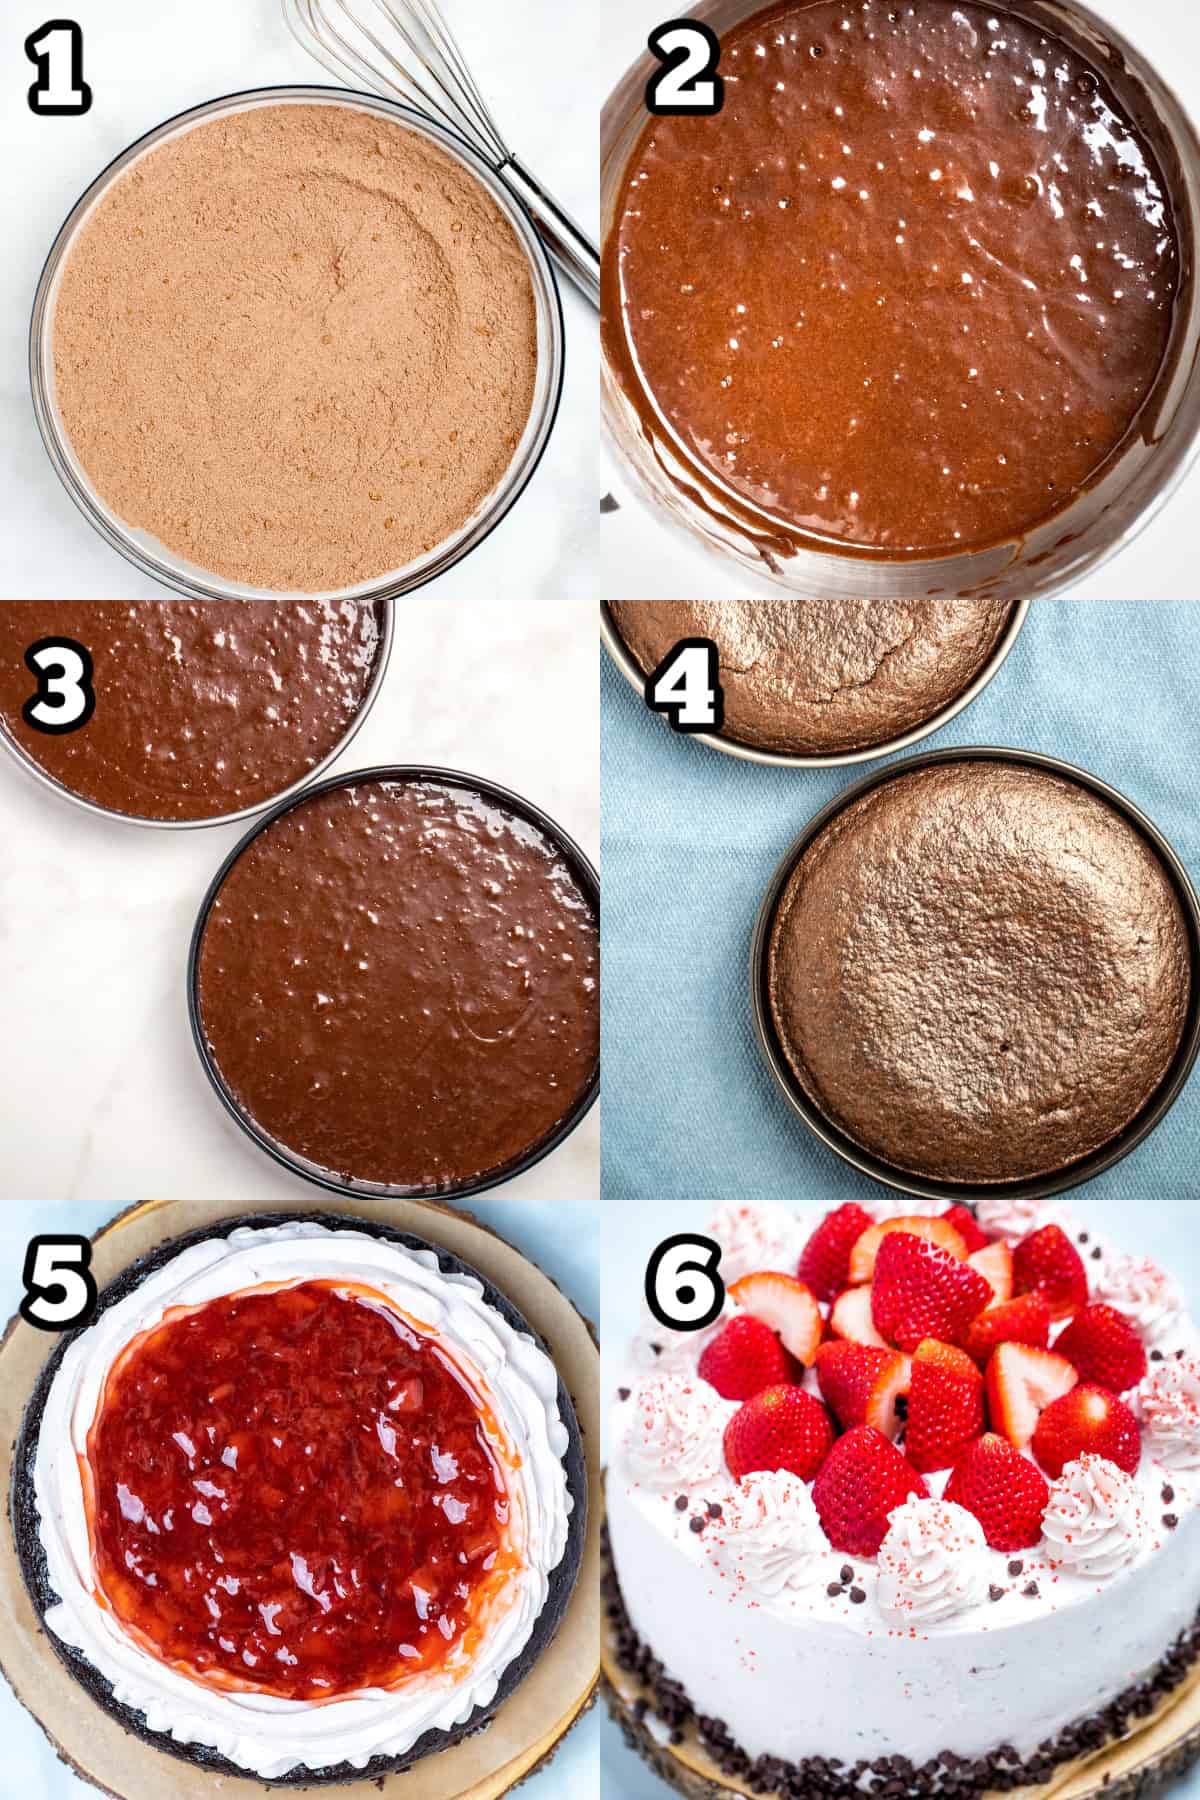 Step by step photos for how to make strawberry chocolate cake.